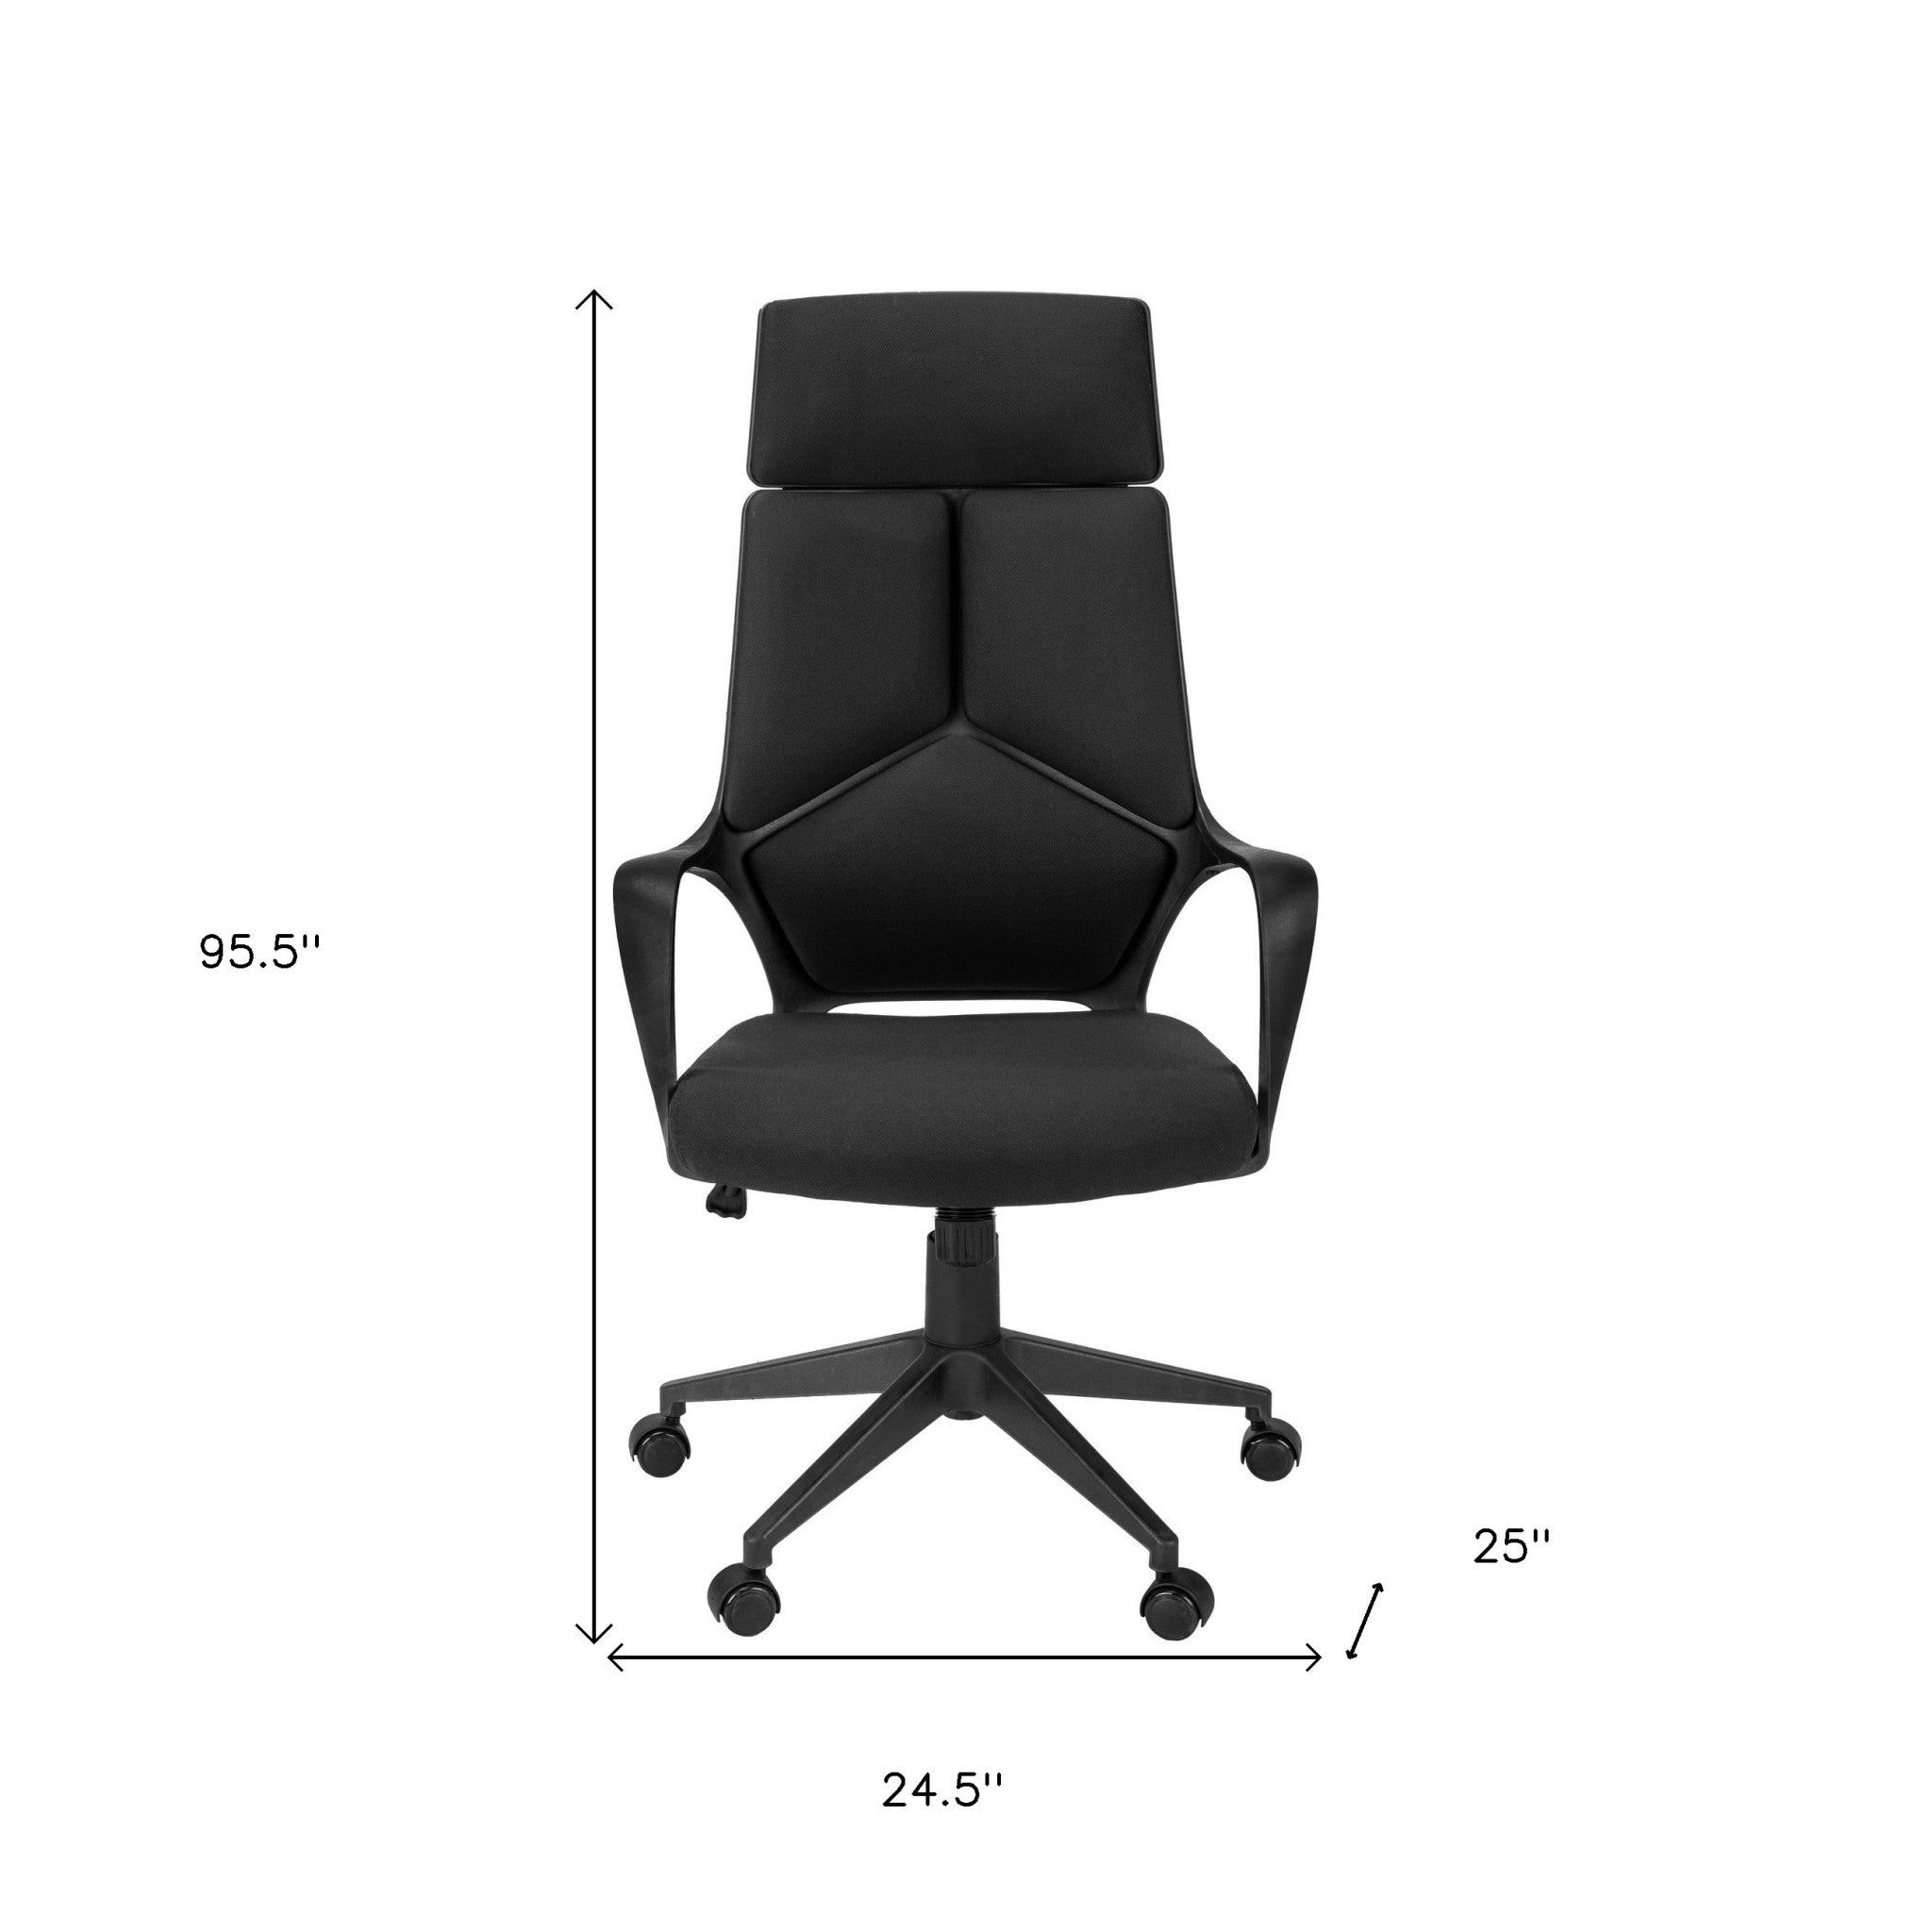 Gray Fabric Tufted Seat Swivel Adjustable Executive Chair Fabric Back Plastic Frame - Tuesday Morning-Office Chairs